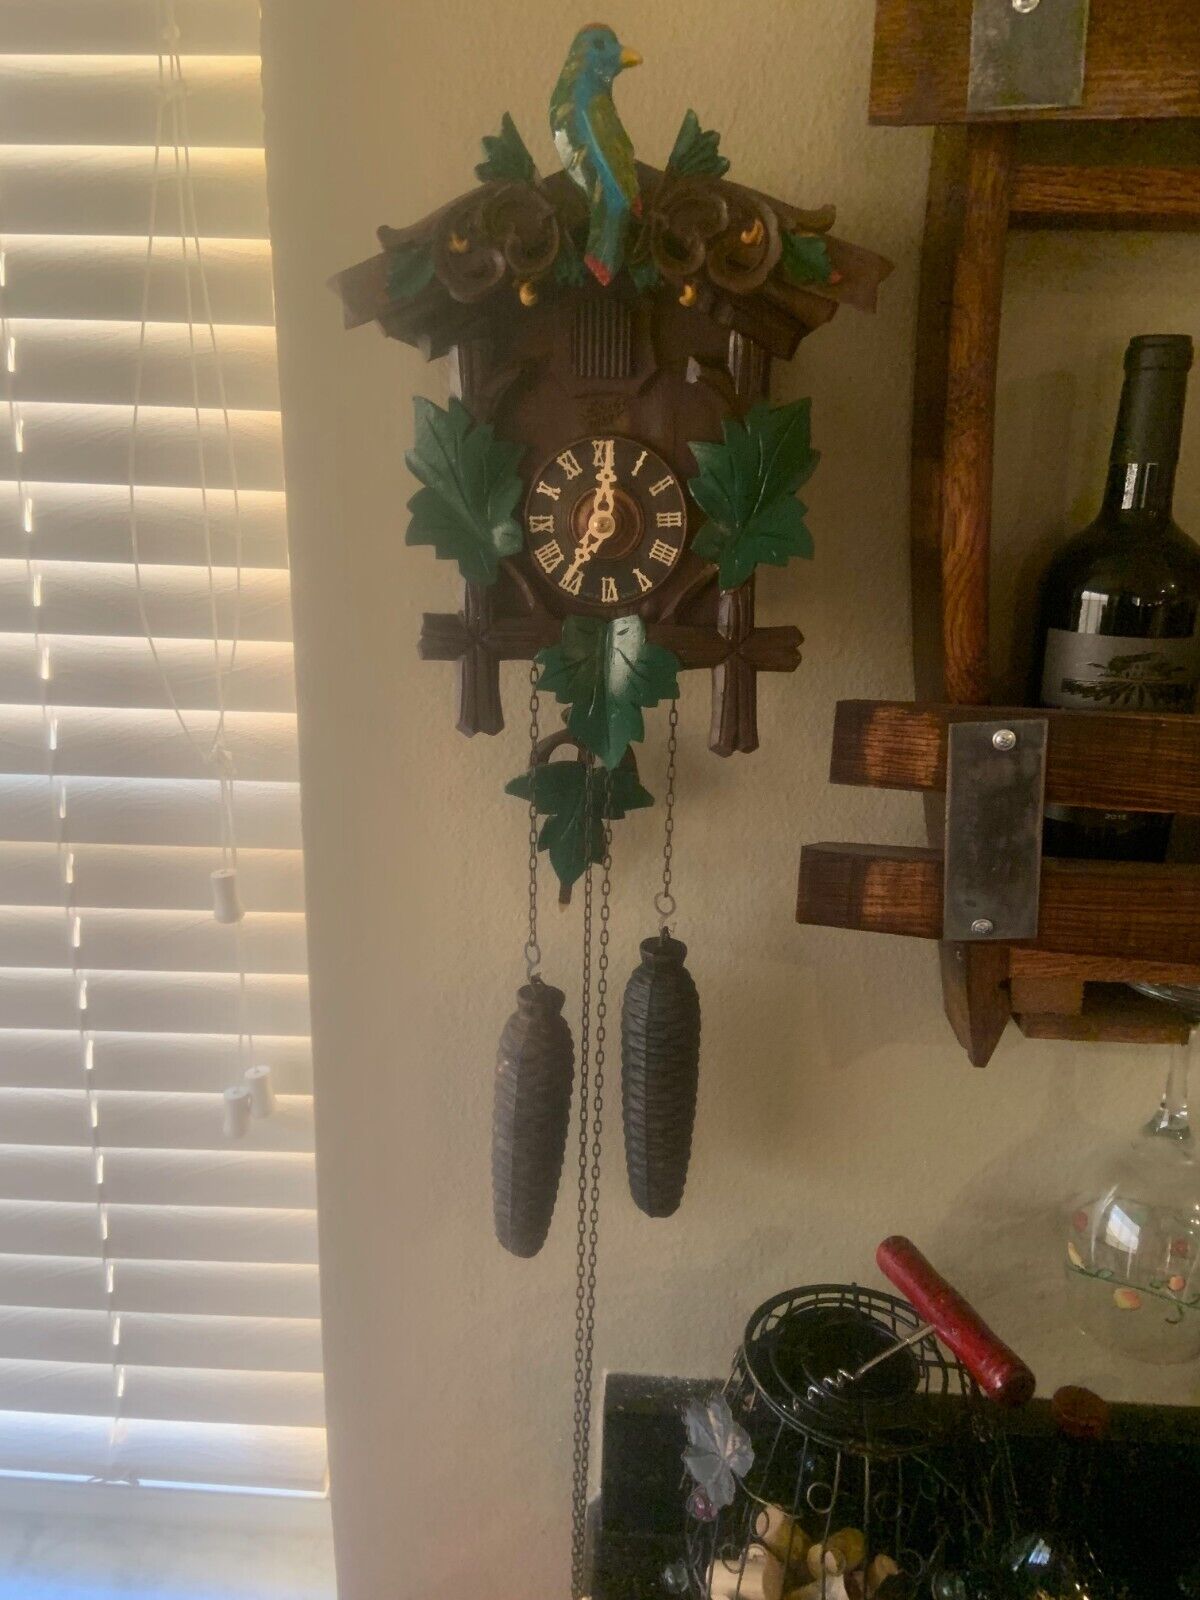 VINTAGE 8 DAY CUCKOO CLOCK WORKING COLORFUL PERCHED BIRD